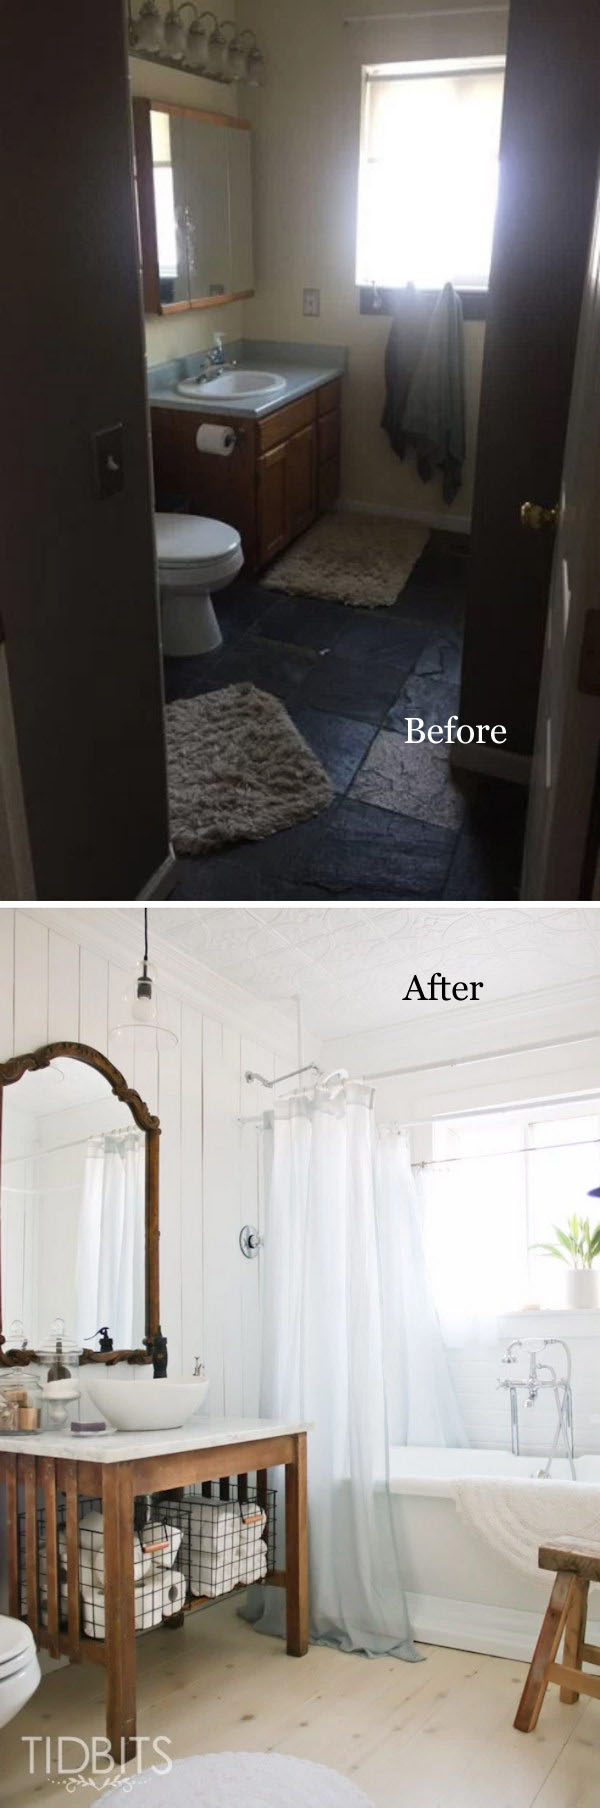 30 Dramatic Before and After Bathroom Makeovers